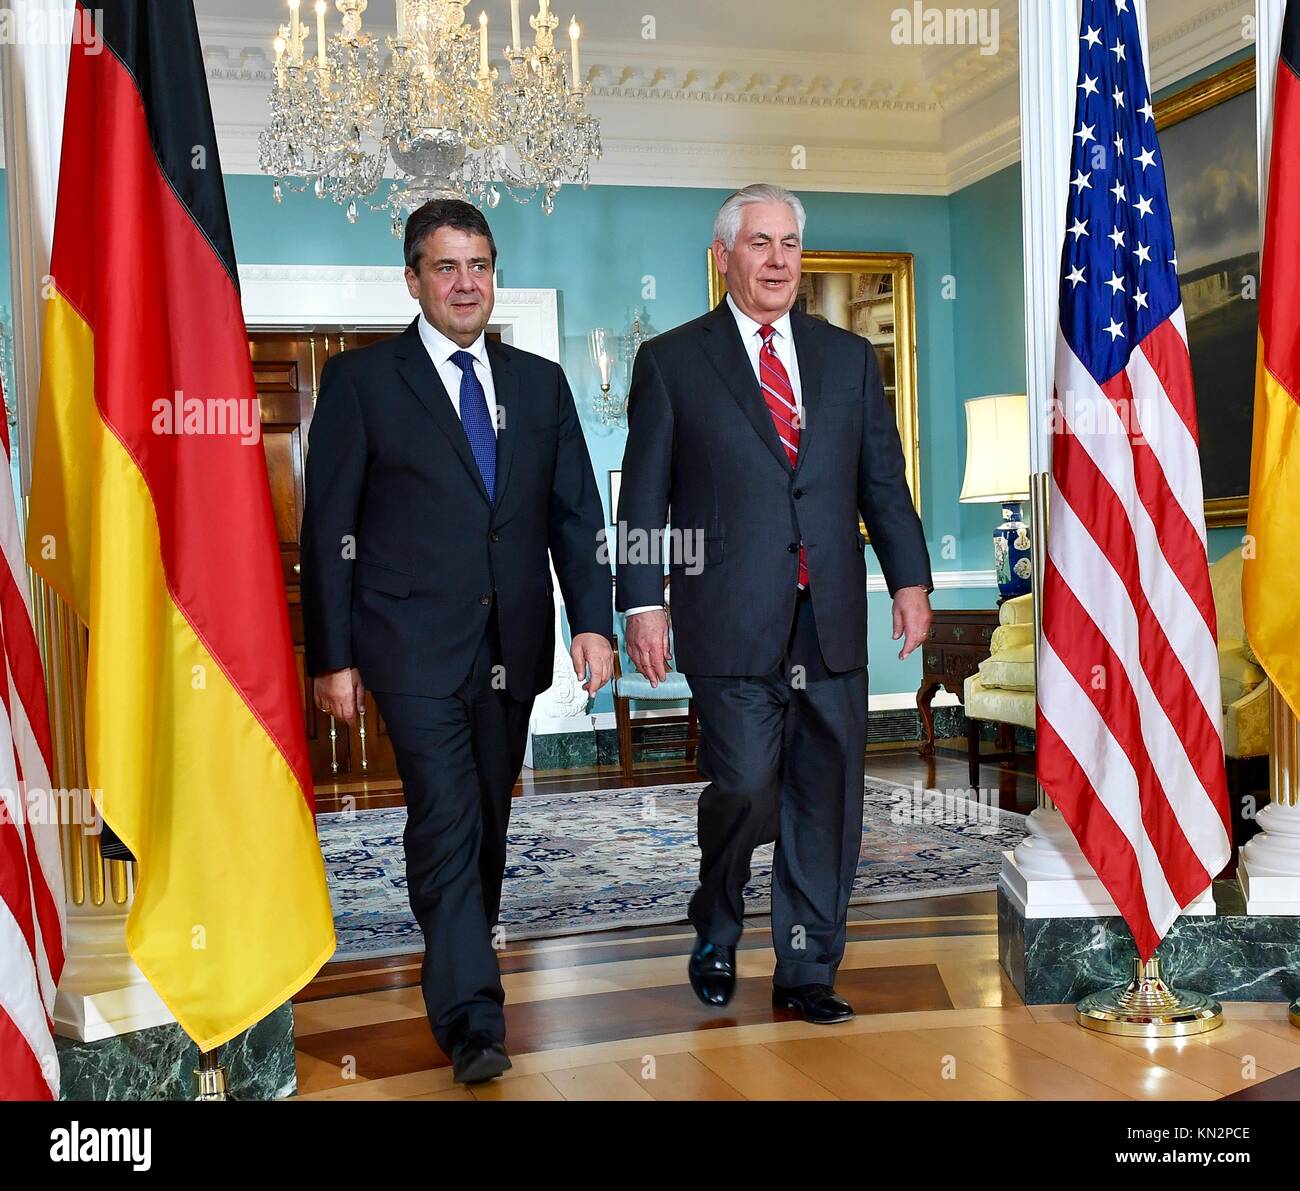 German Foreign Minister Sigmar Gabriel (left) and U.S. Secretary of State Rex Tillerson meet at the U.S. Department of State November 30, 2017 in Washington, DC.  (photo by State Department Photo via Planetpix) Stock Photo